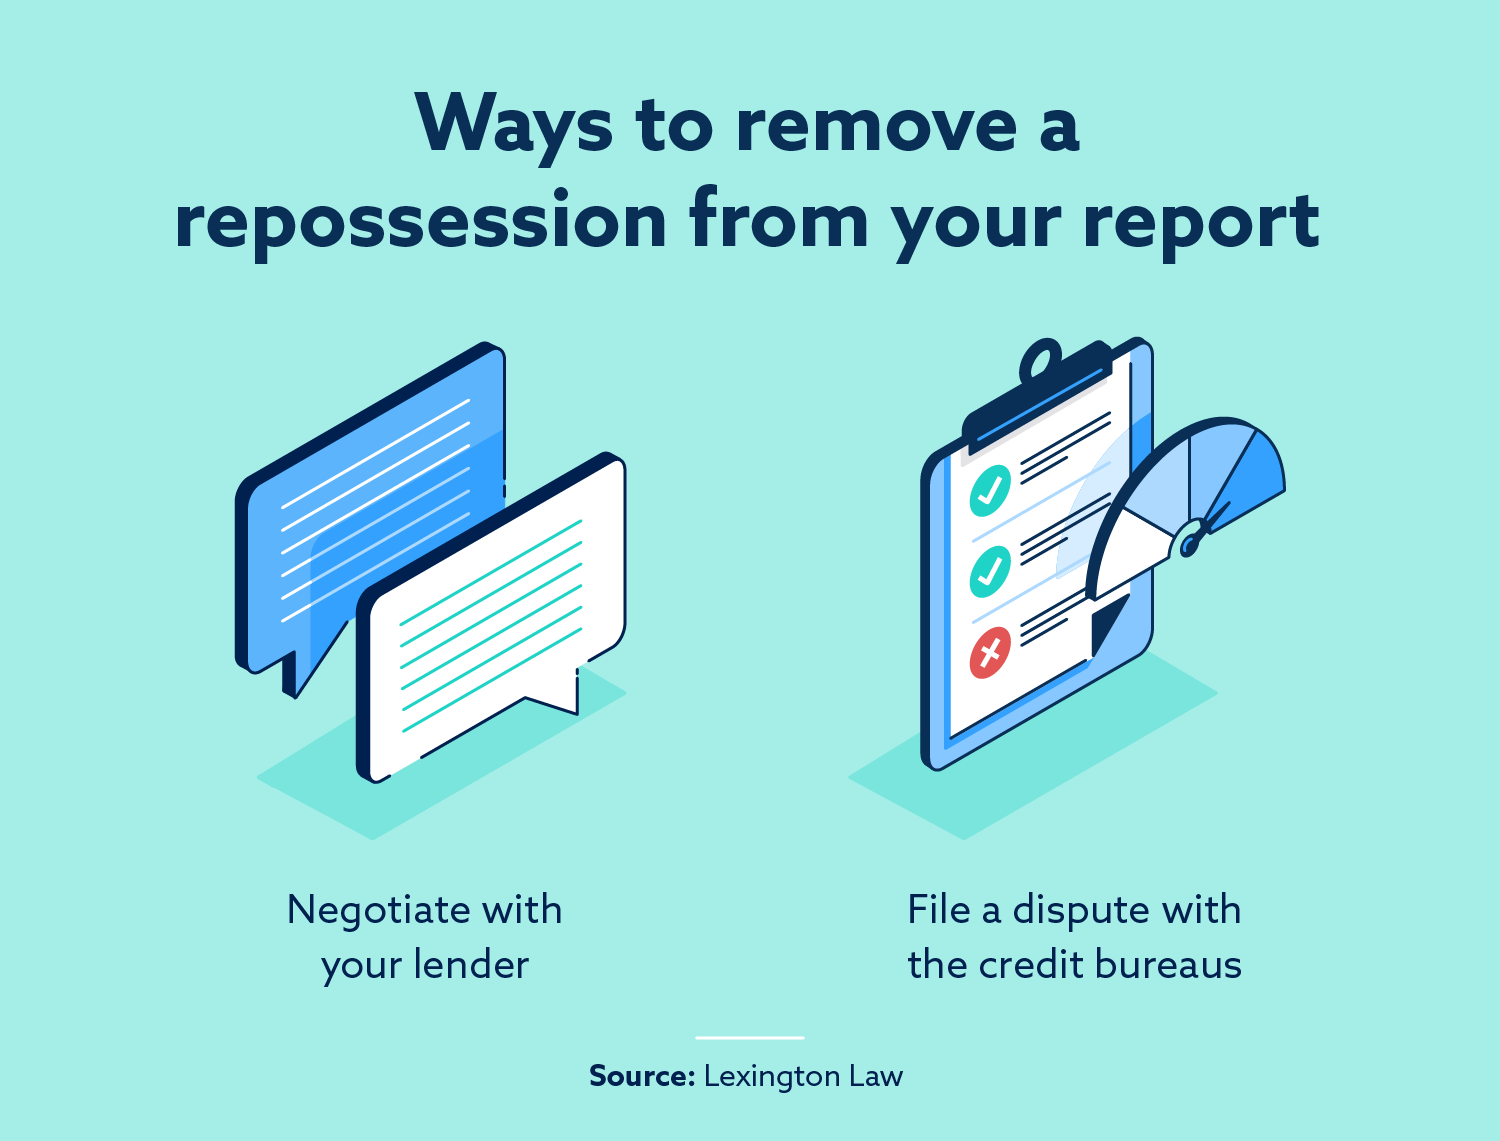 How to remove a repossession from your credit report